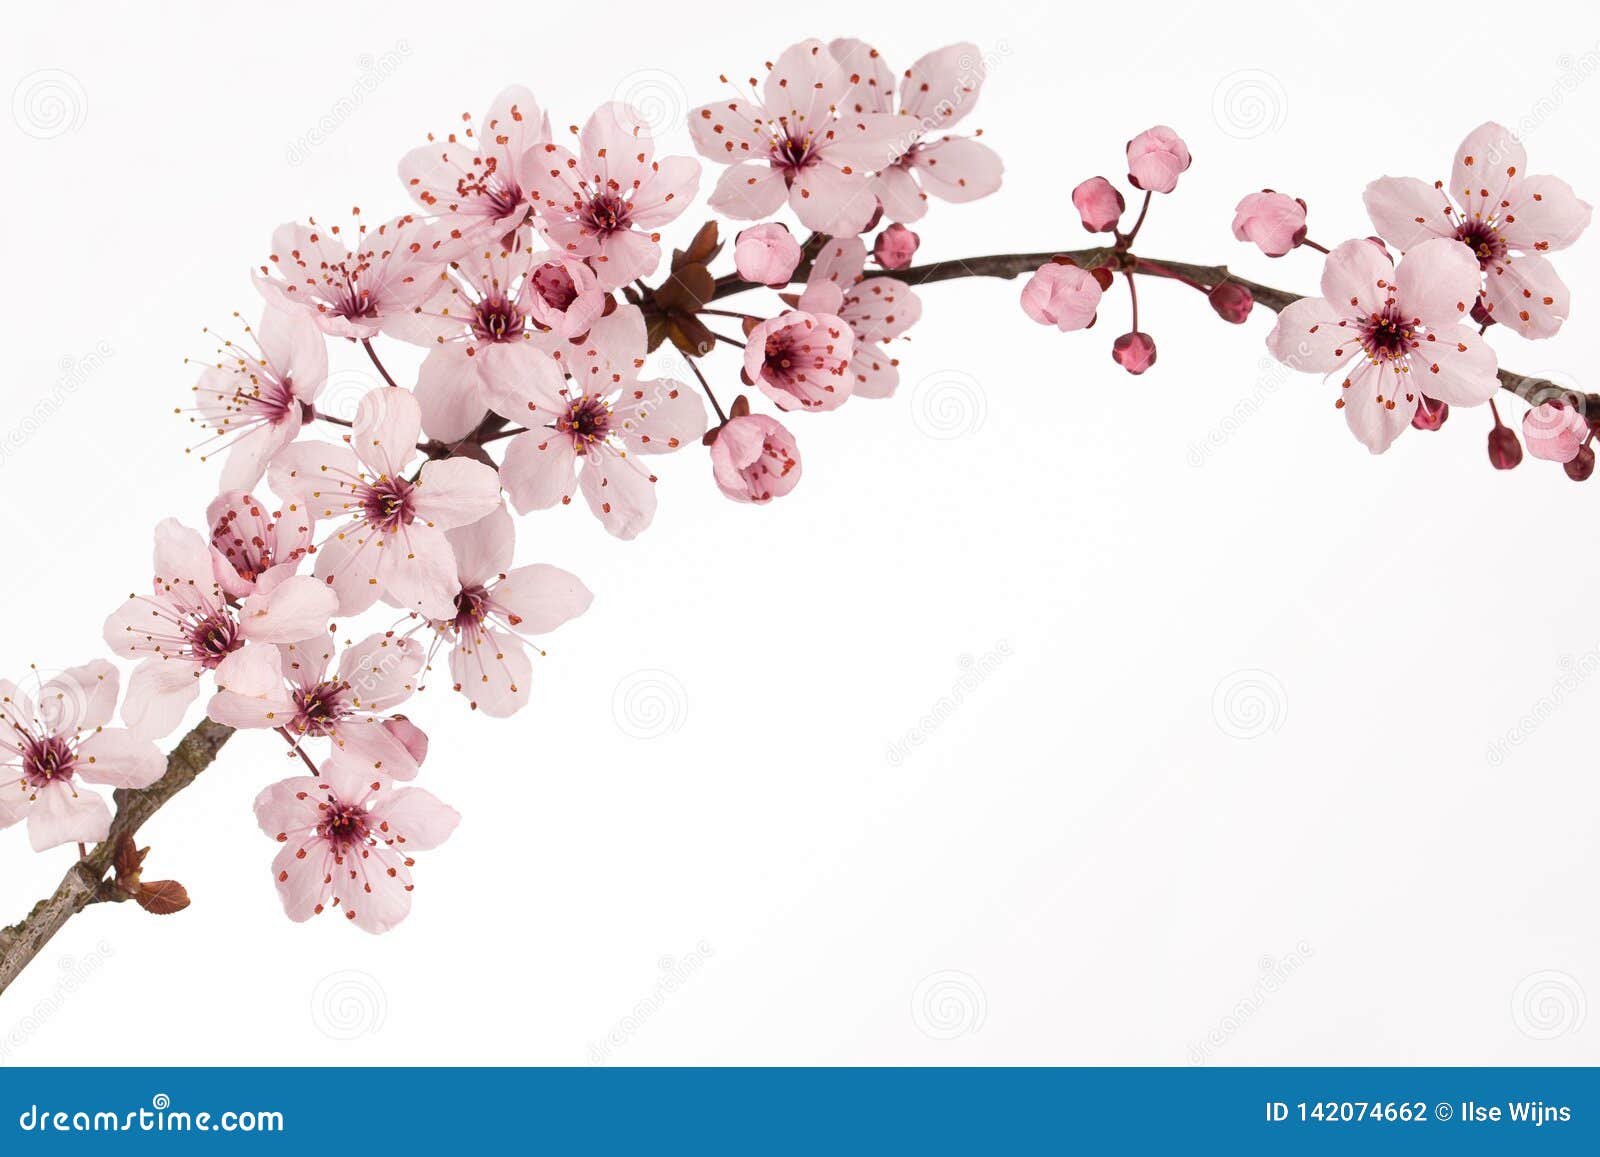 branch of japanese cherry blossom with white background